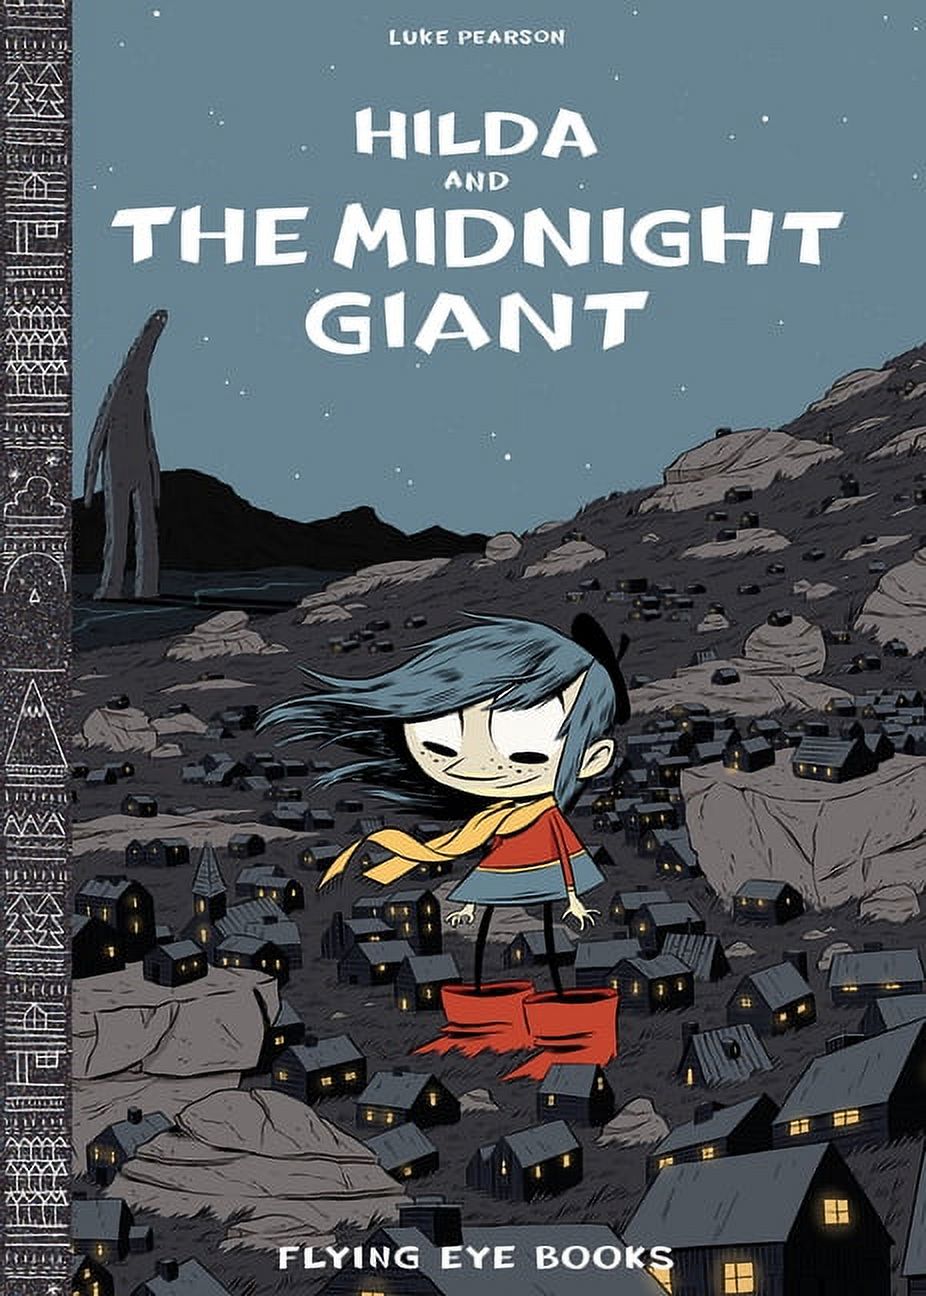 Hilda and the Midnight Giant: Book 2 (Hardcover) - image 1 of 1